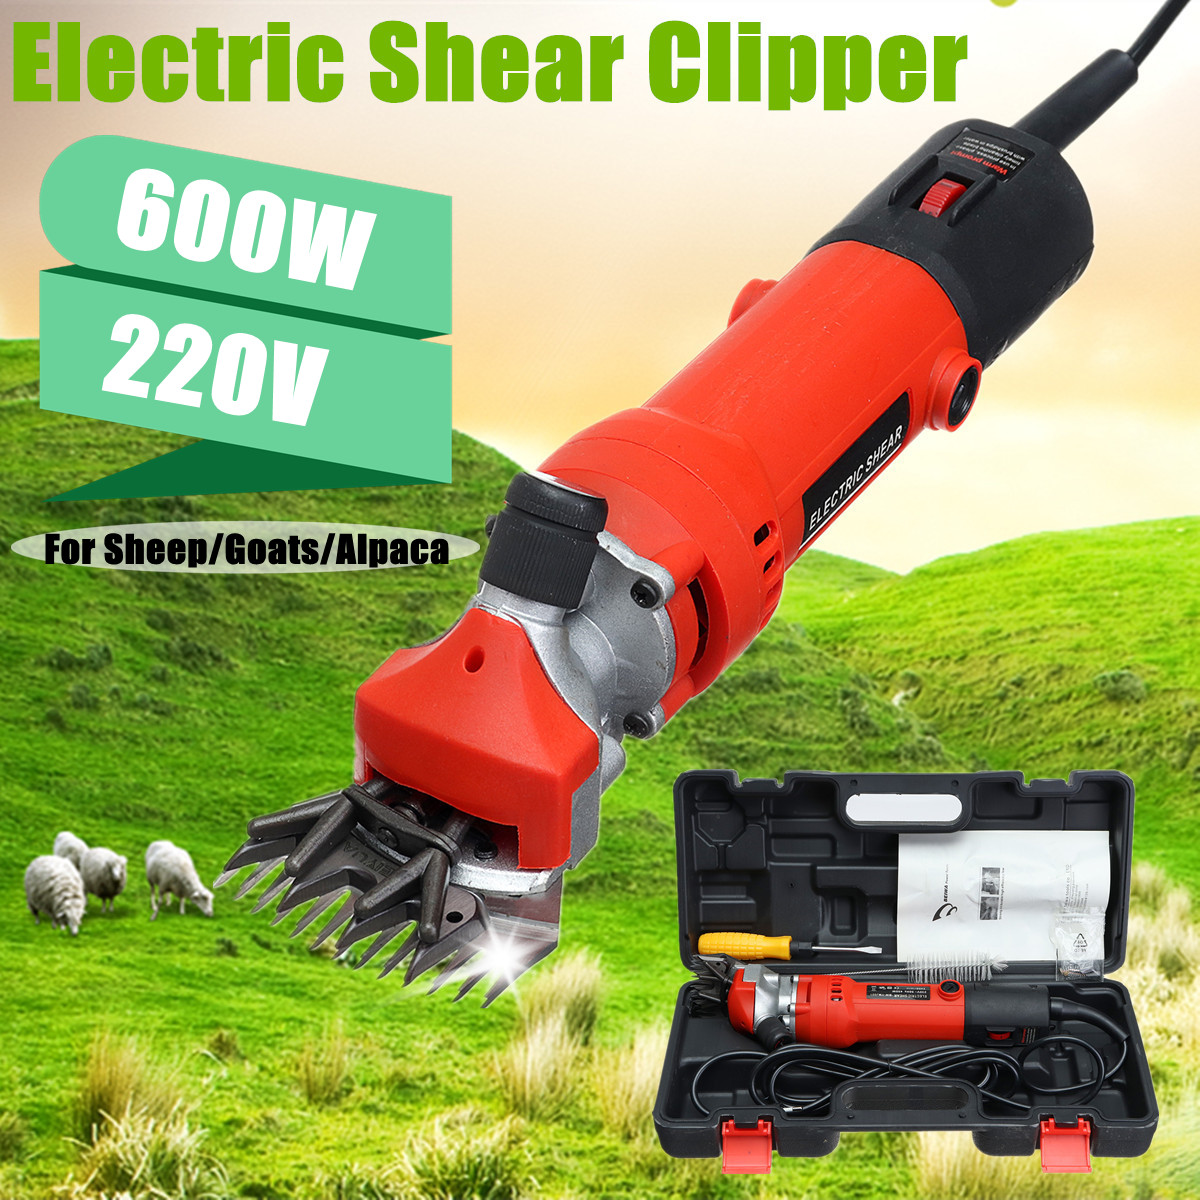 600W-220V-Electric-Sheep-Shearing-Machine-Goat-Hair-Trimmer-Clippers-Power-Tools-1347454-2